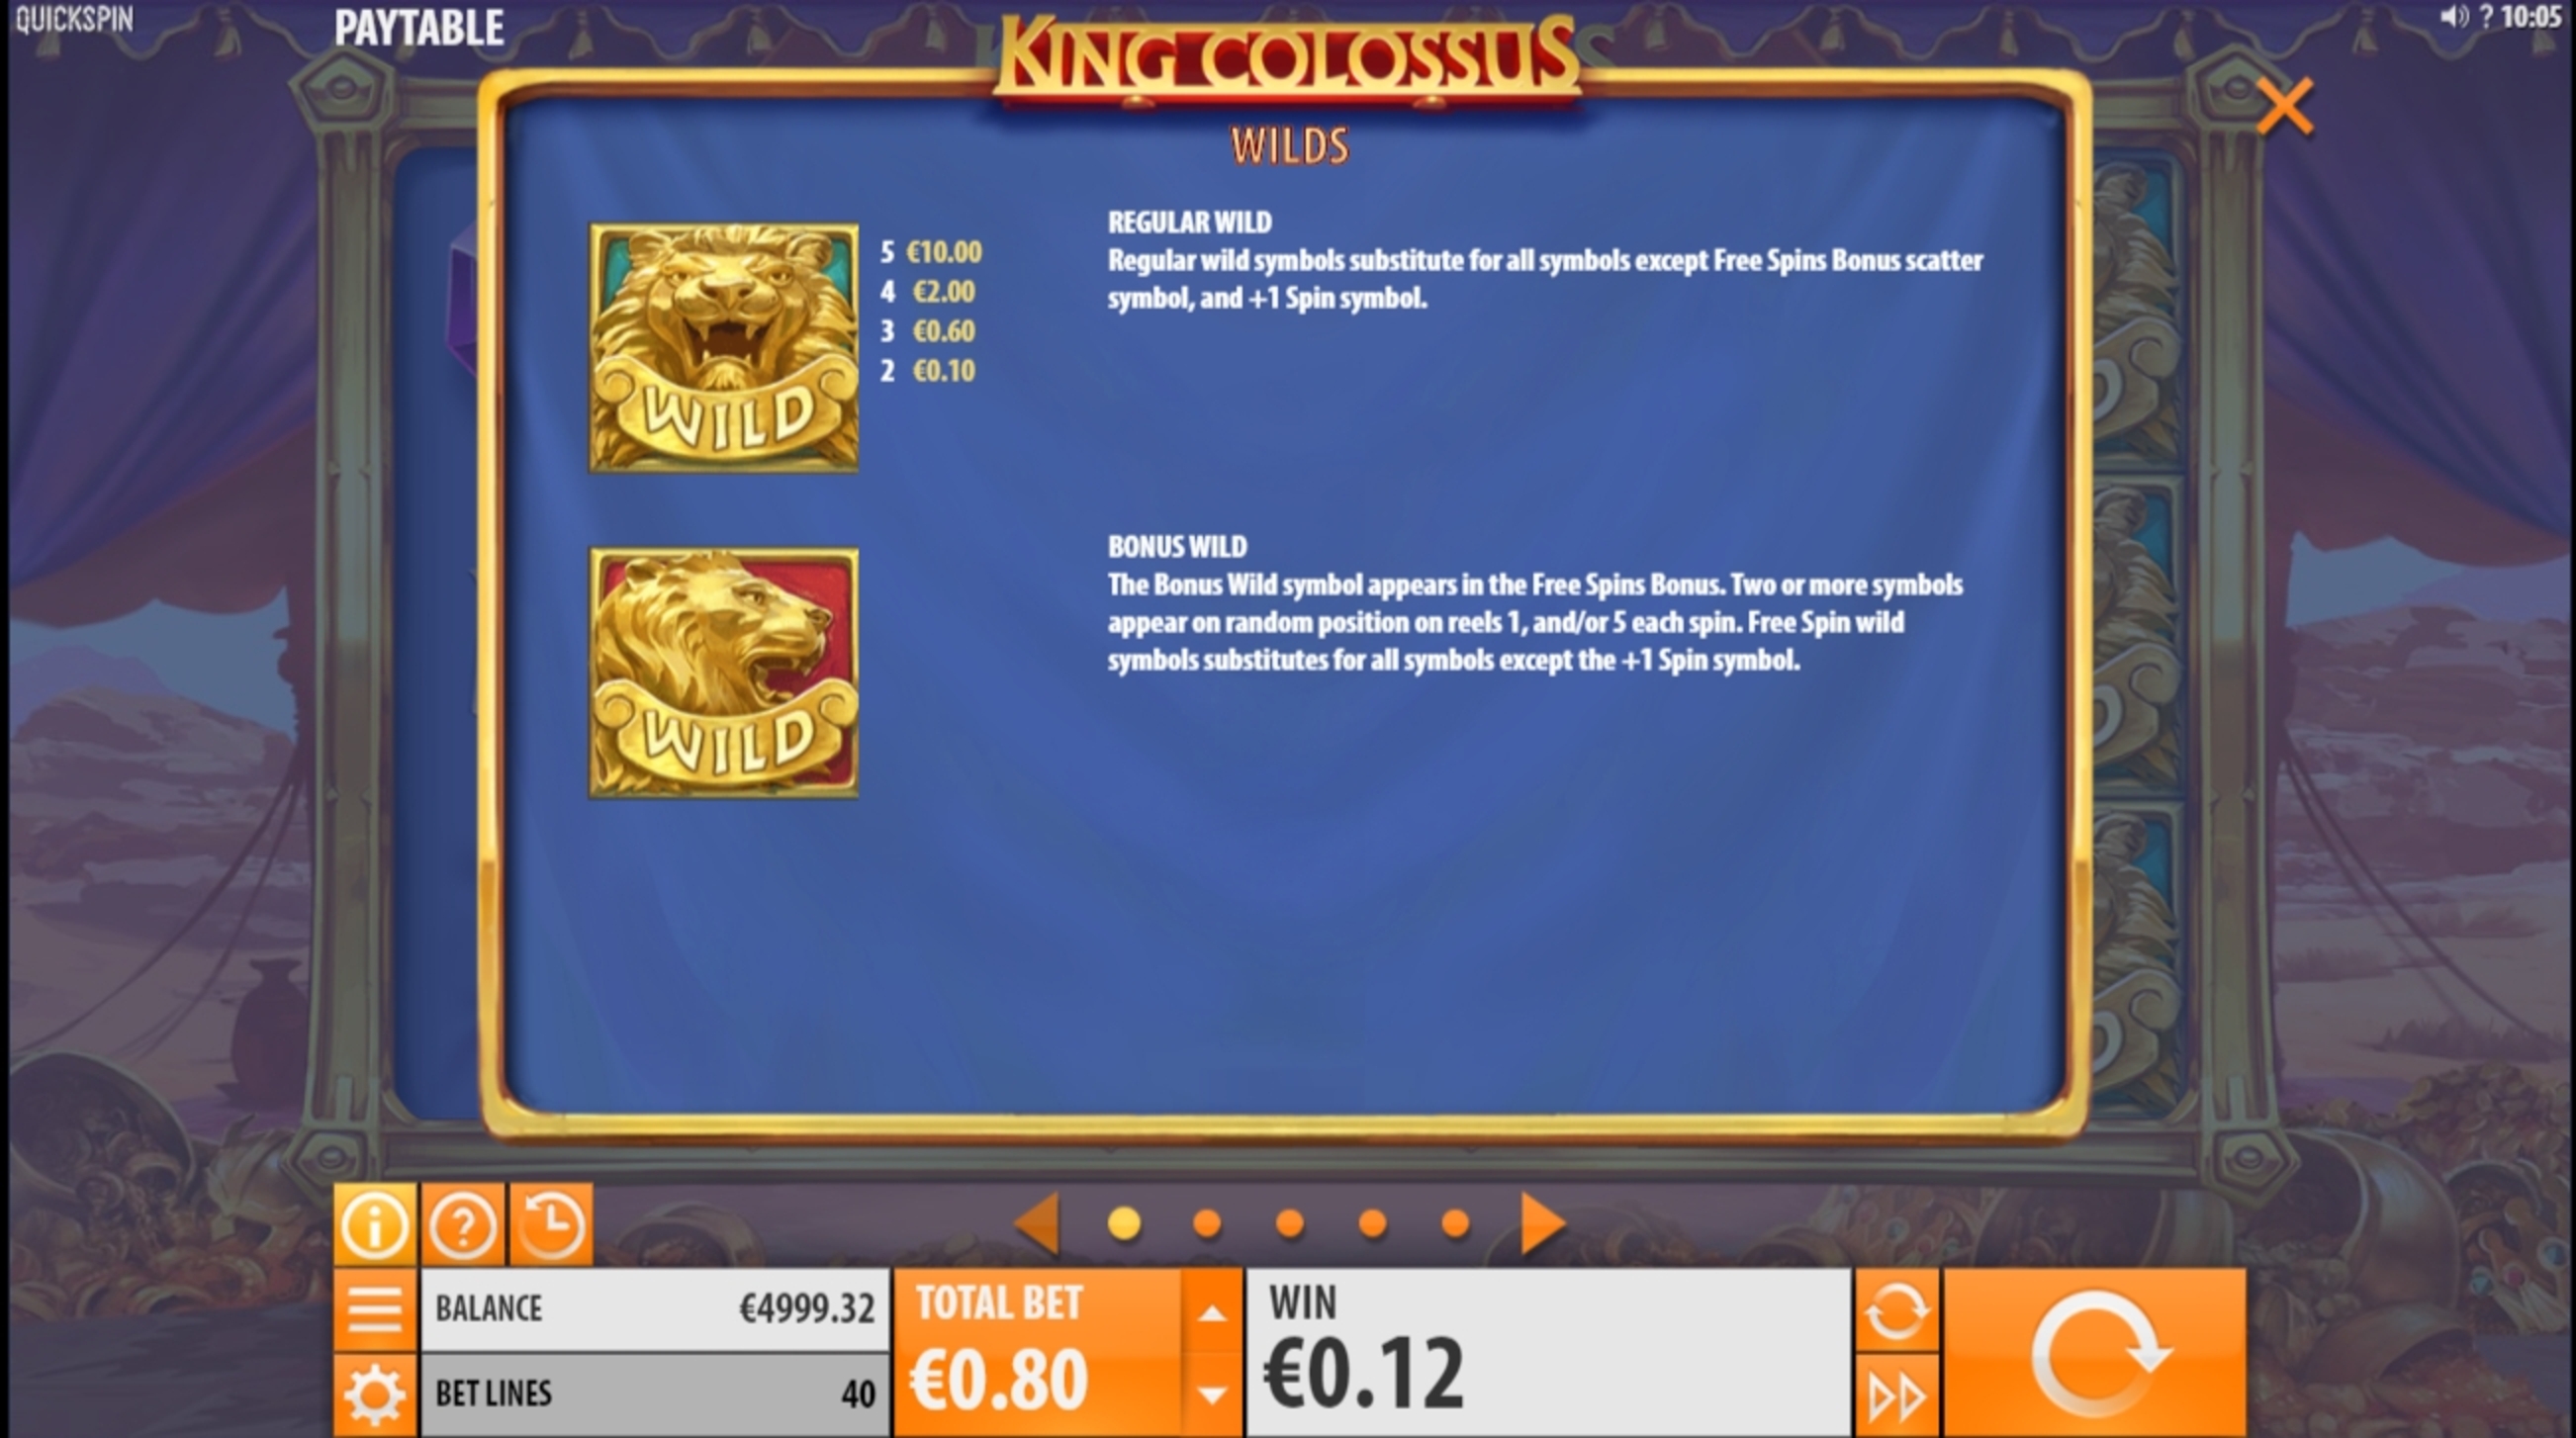 Info of King Colossus Slot Game by Quickspin